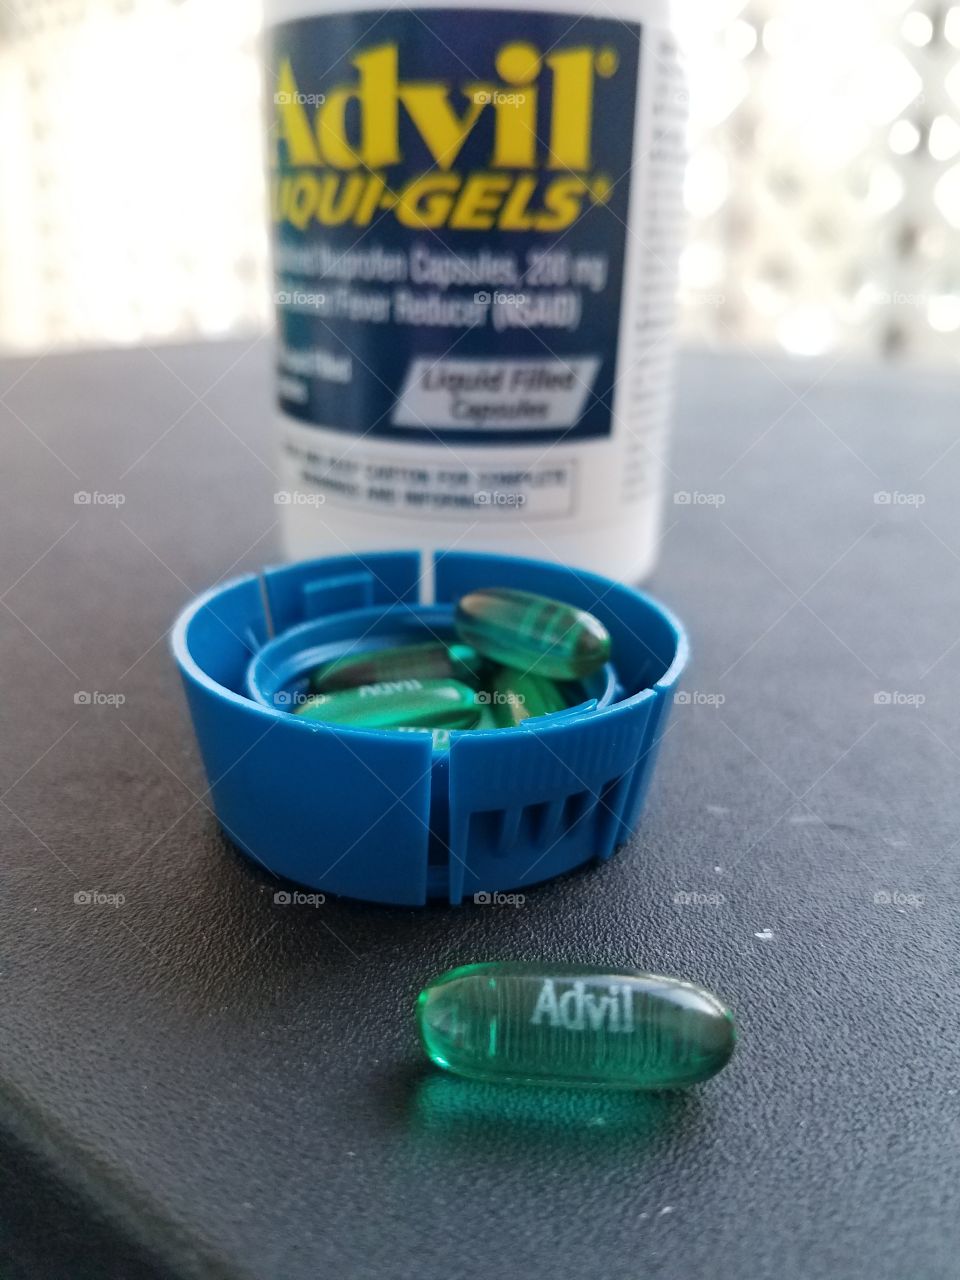 Advil liquigels in cap with Advil bottle in the background